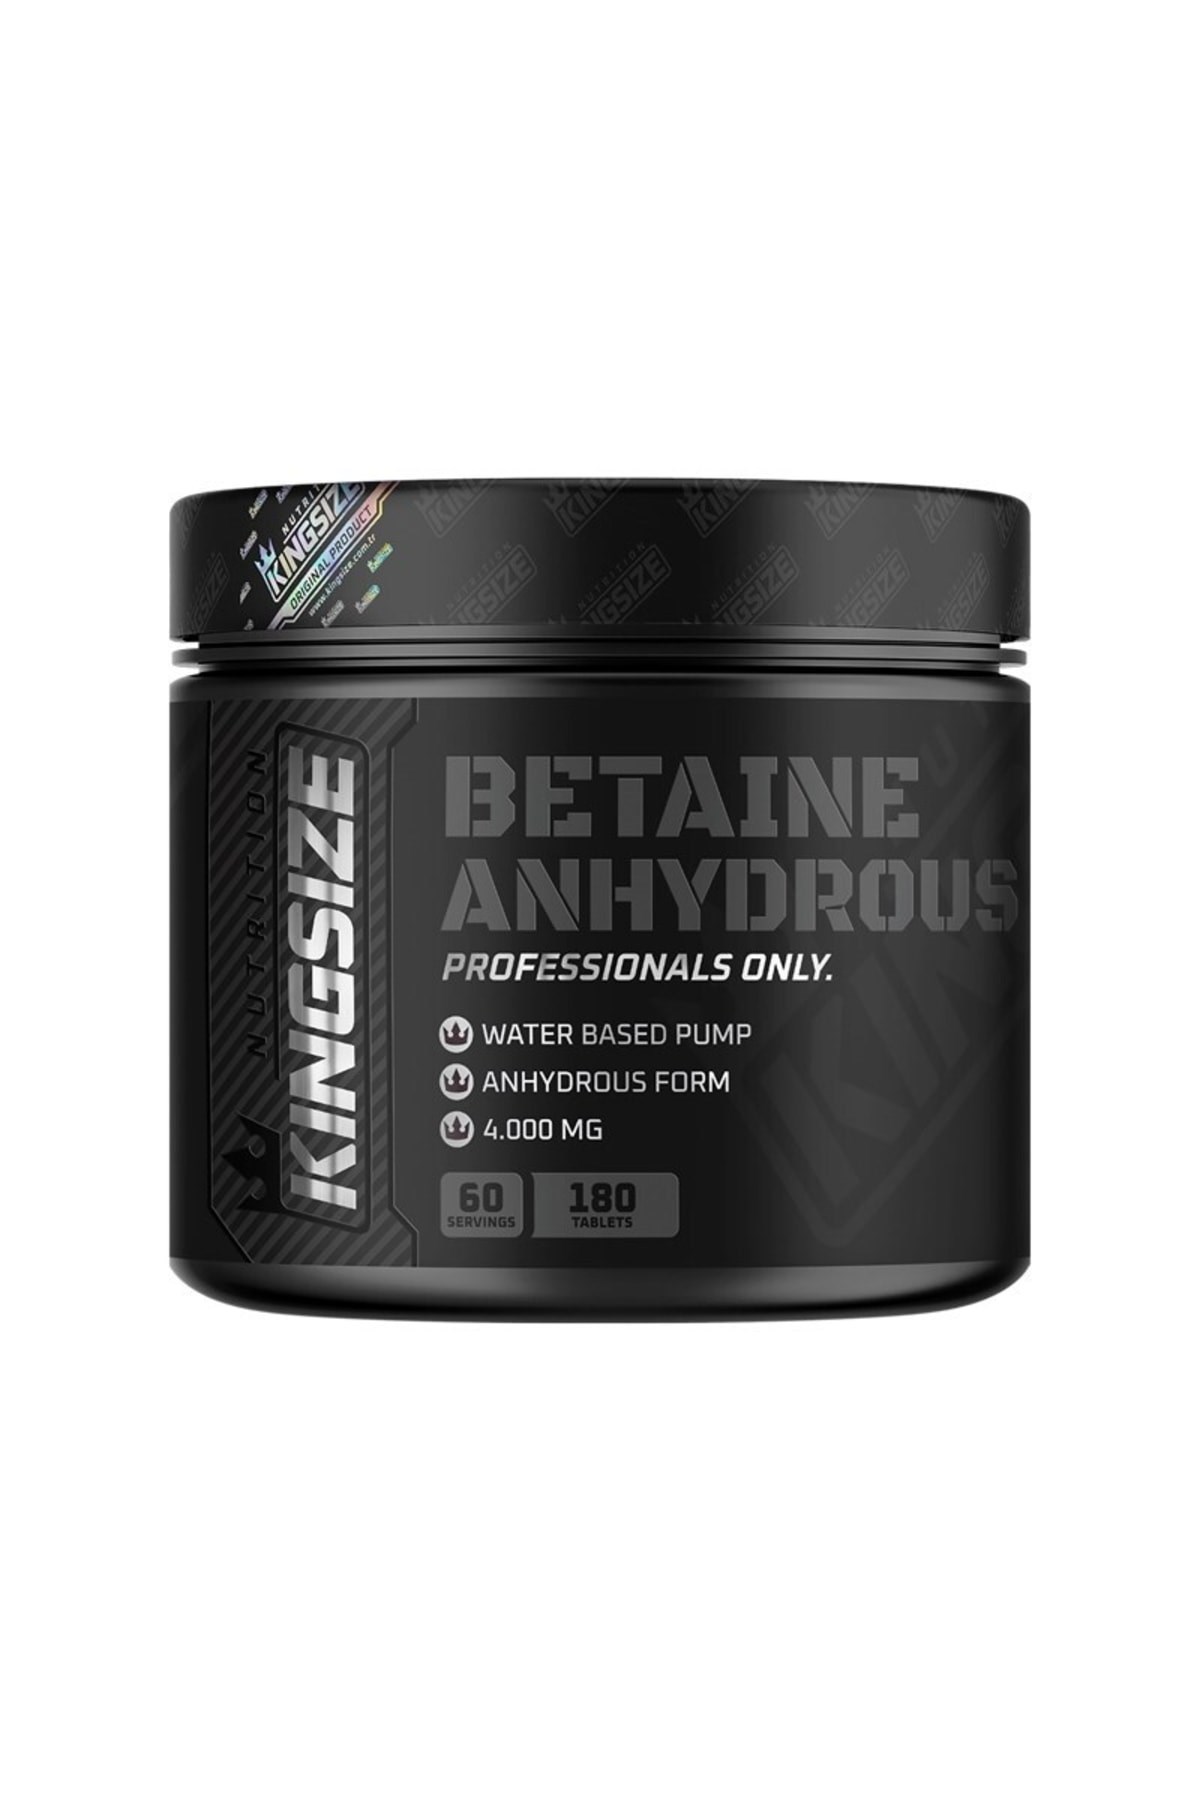 Kingsize Nutrition Betaine Anhydrous 180 Tablet